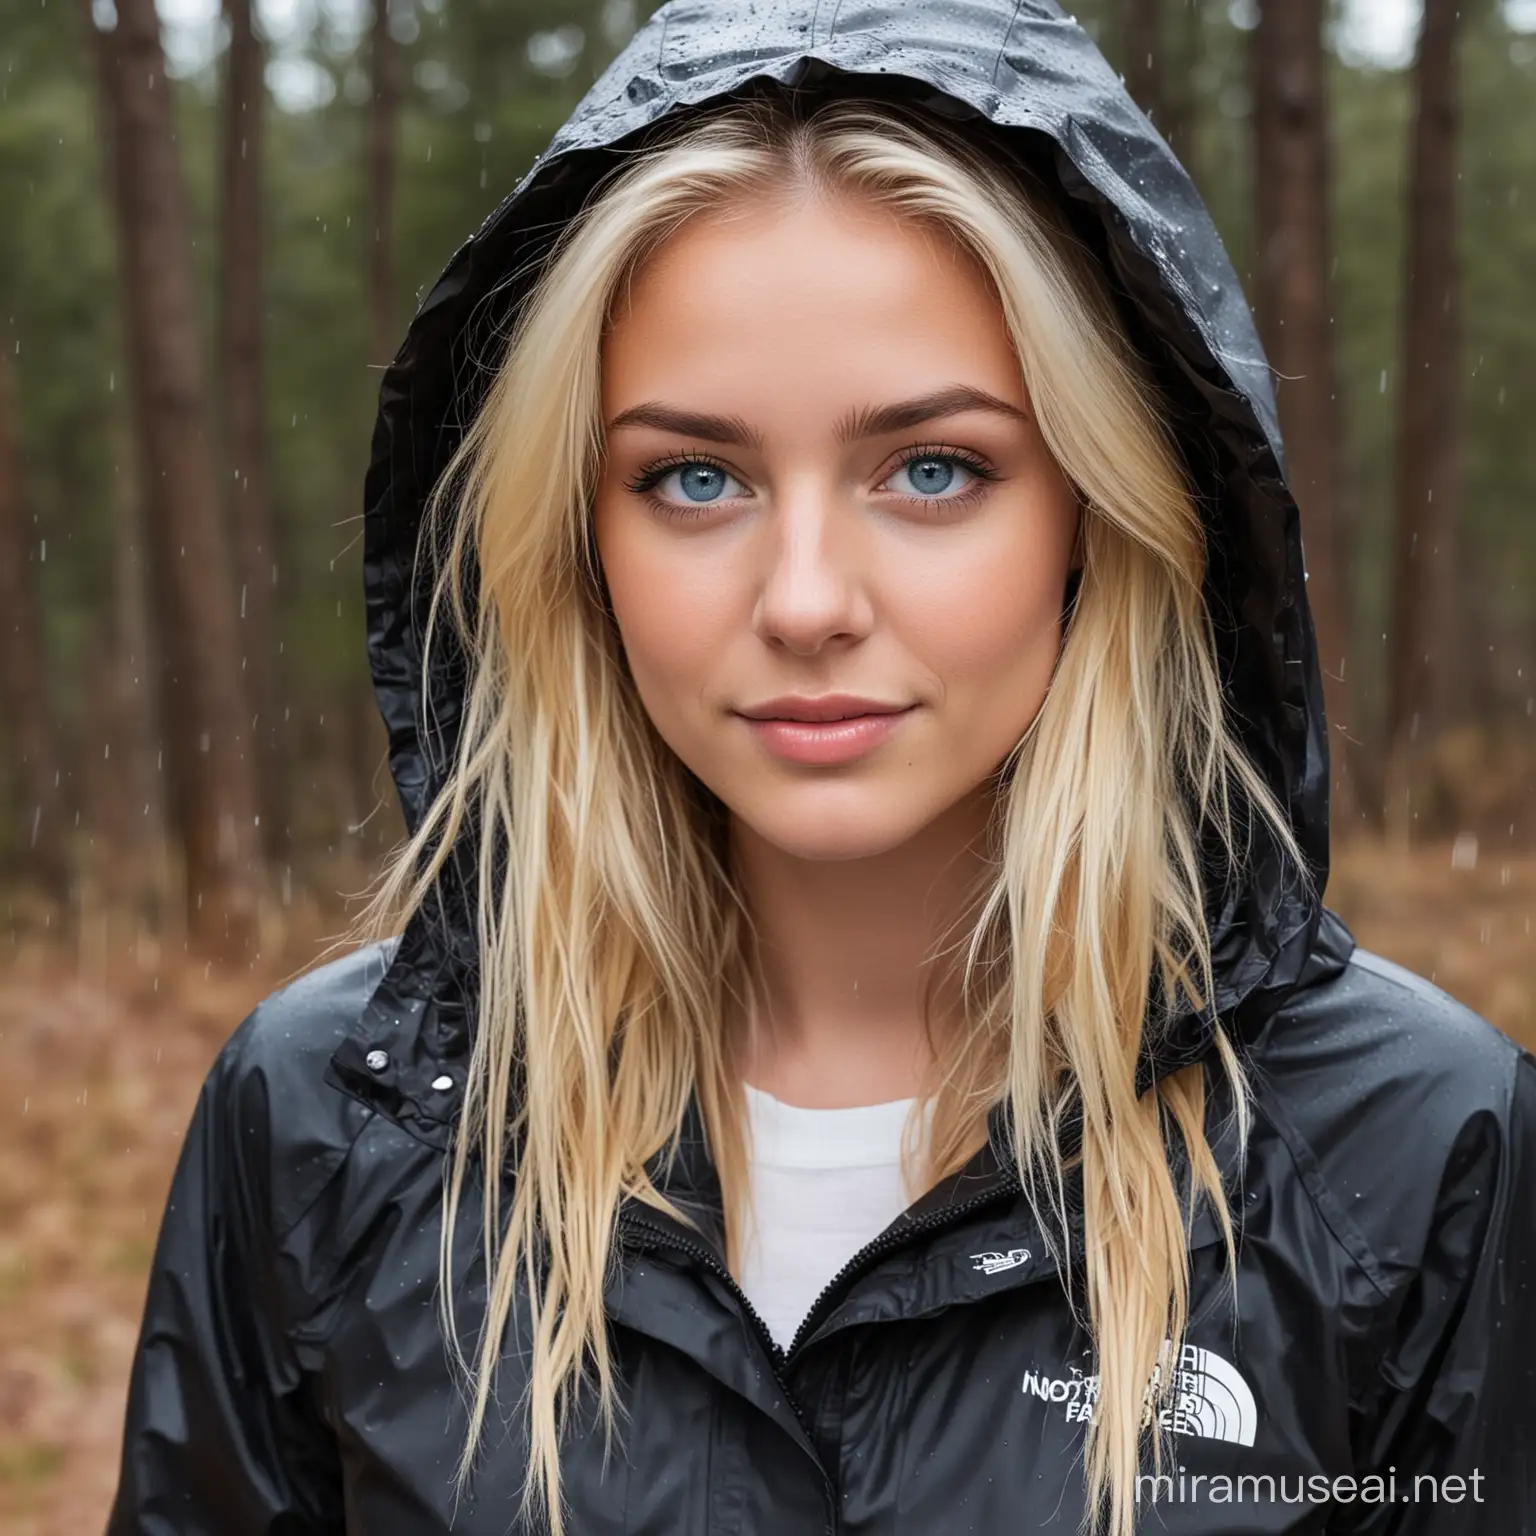 Young Woman in Black Rain Jacket with Blonde Hair and Blue Eyes